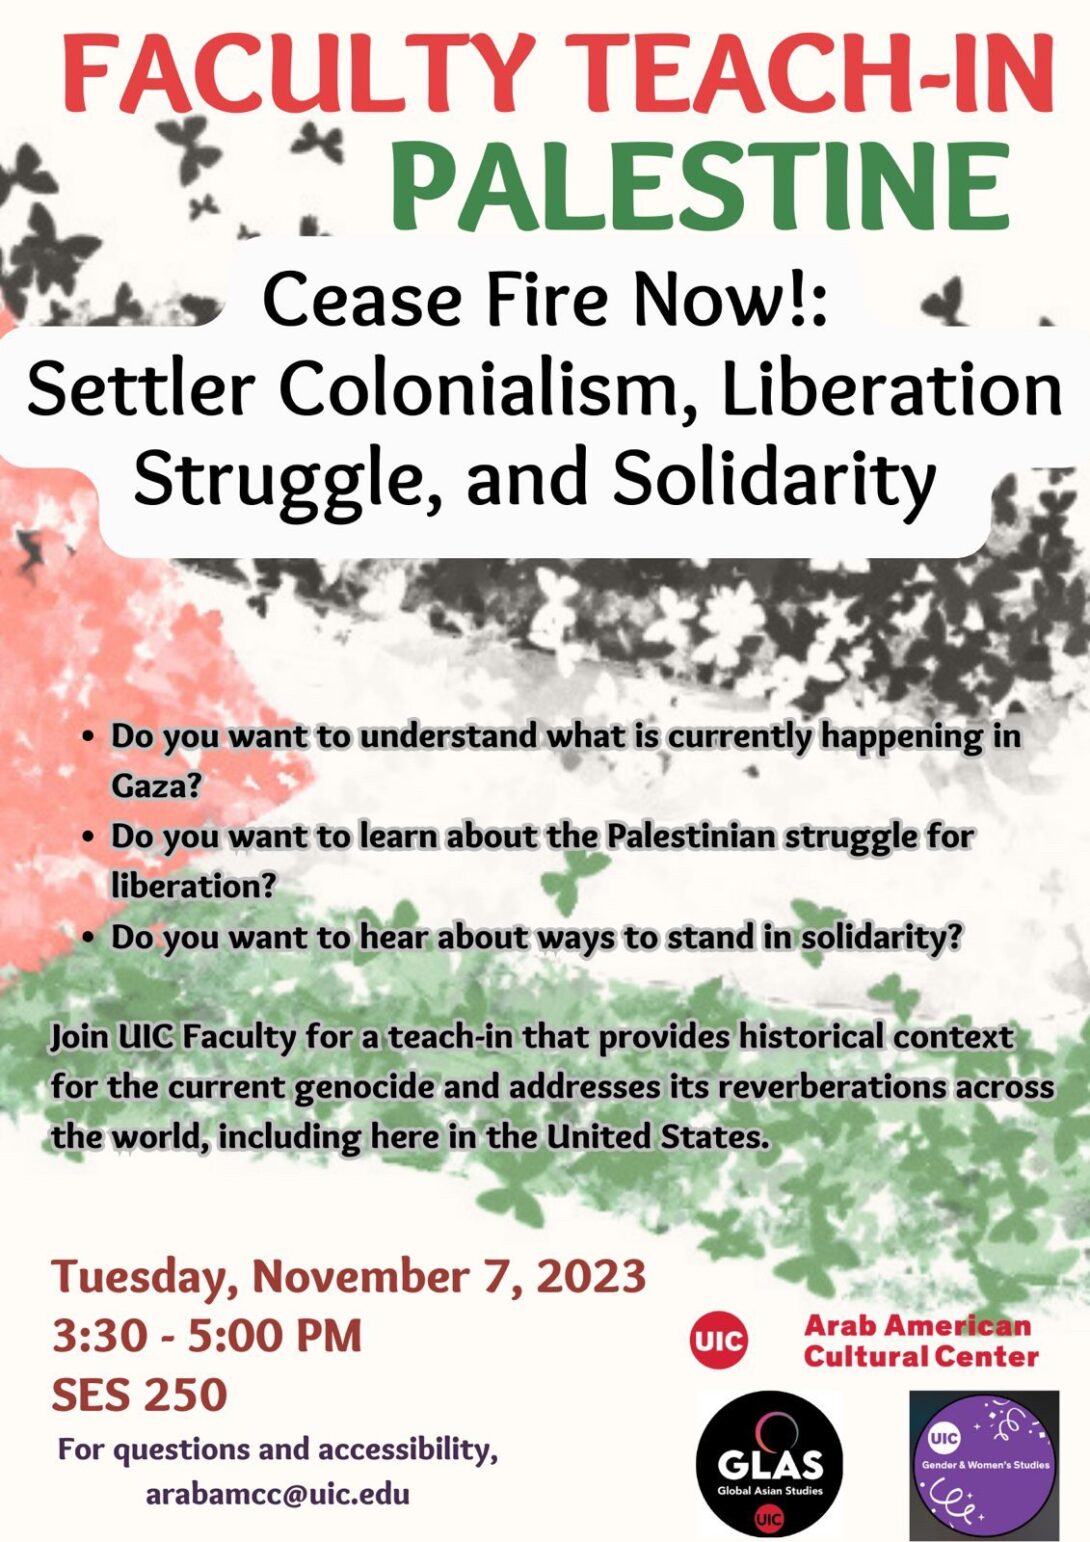 flyer with palestinian flag uic logos event description